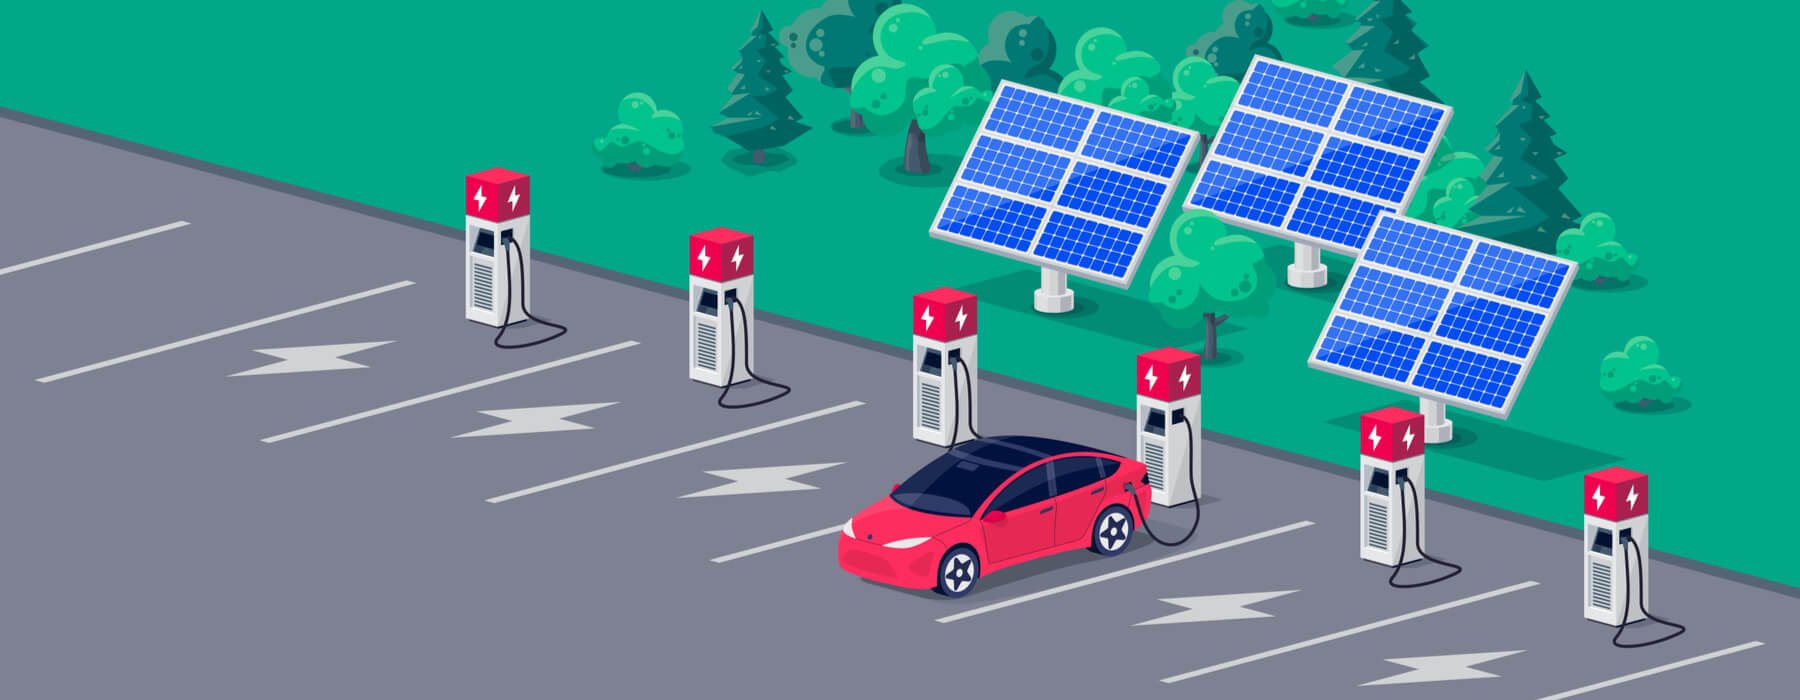 EV Chargers: The Ideal Complement for a Commercial Solar Array